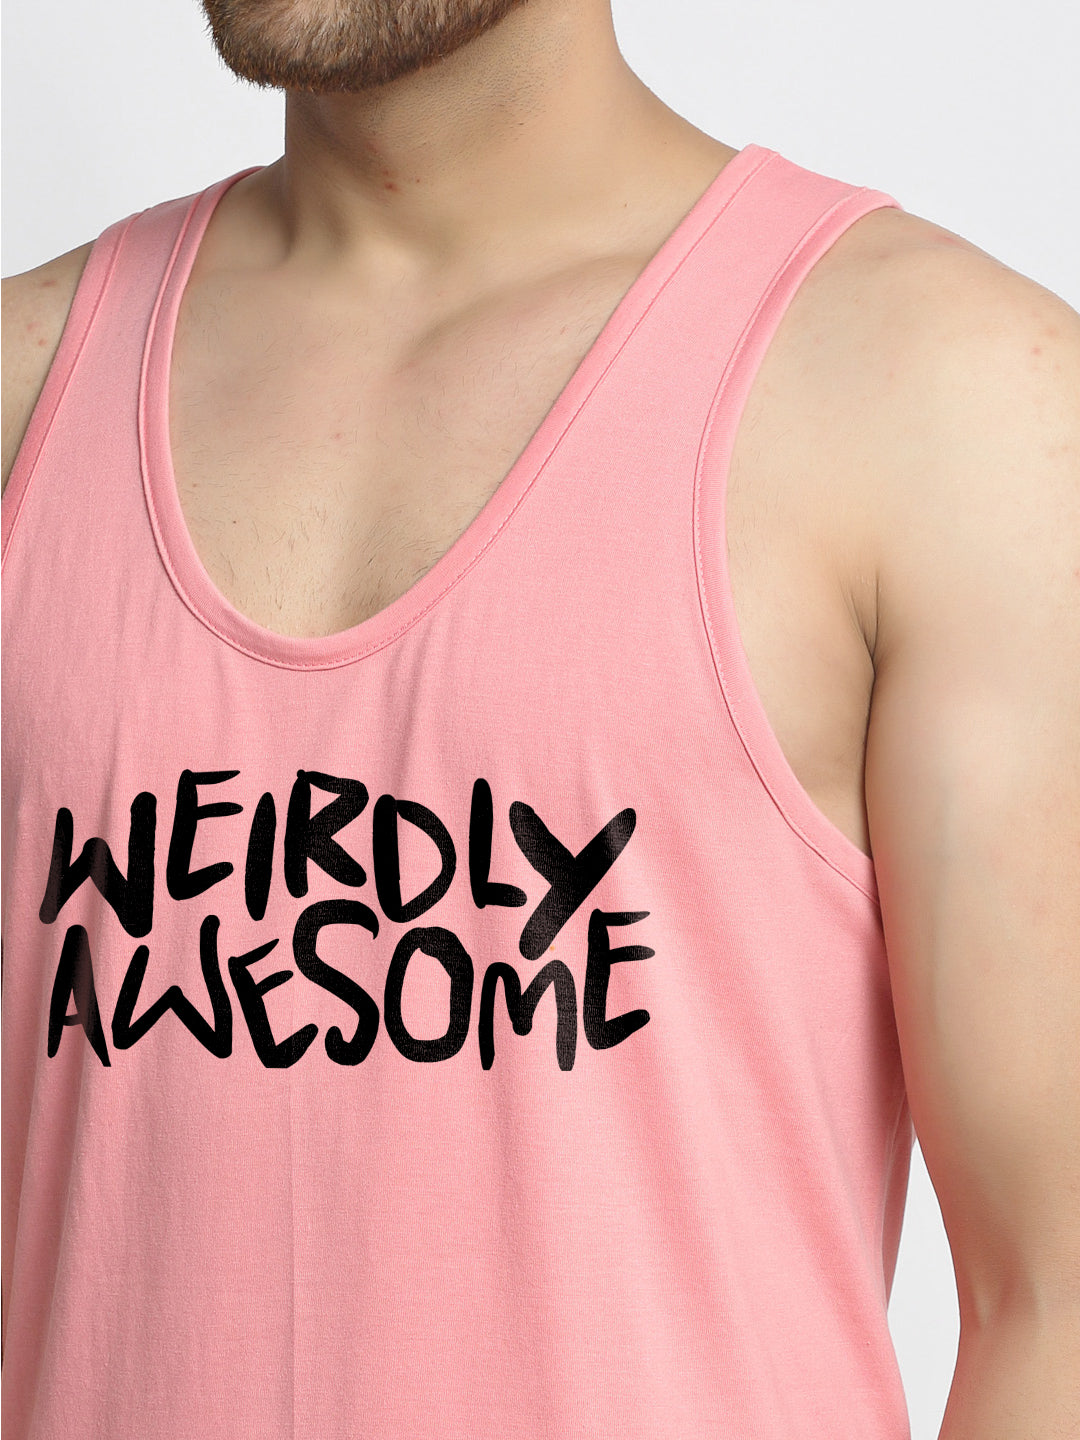 Men Awesome Printed Innerwear Gym Vest - Friskers